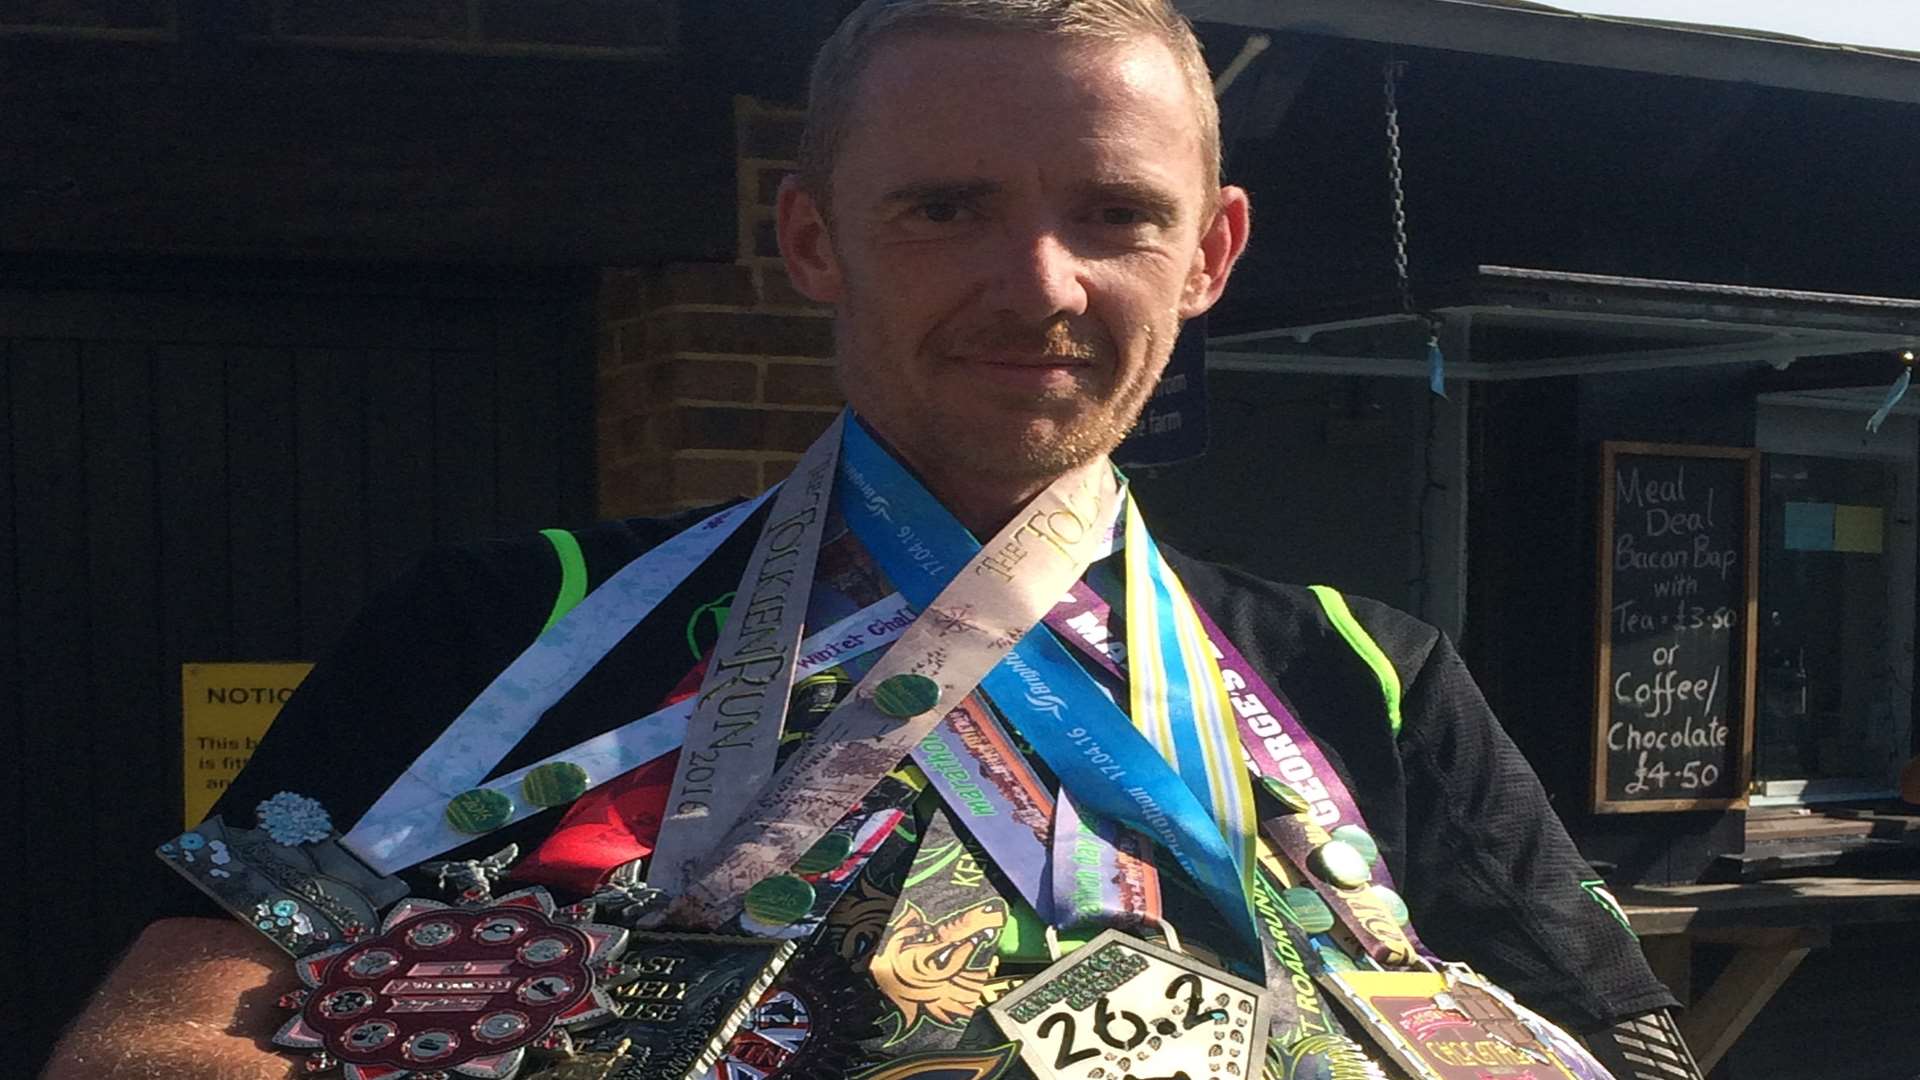 Jon with his medals